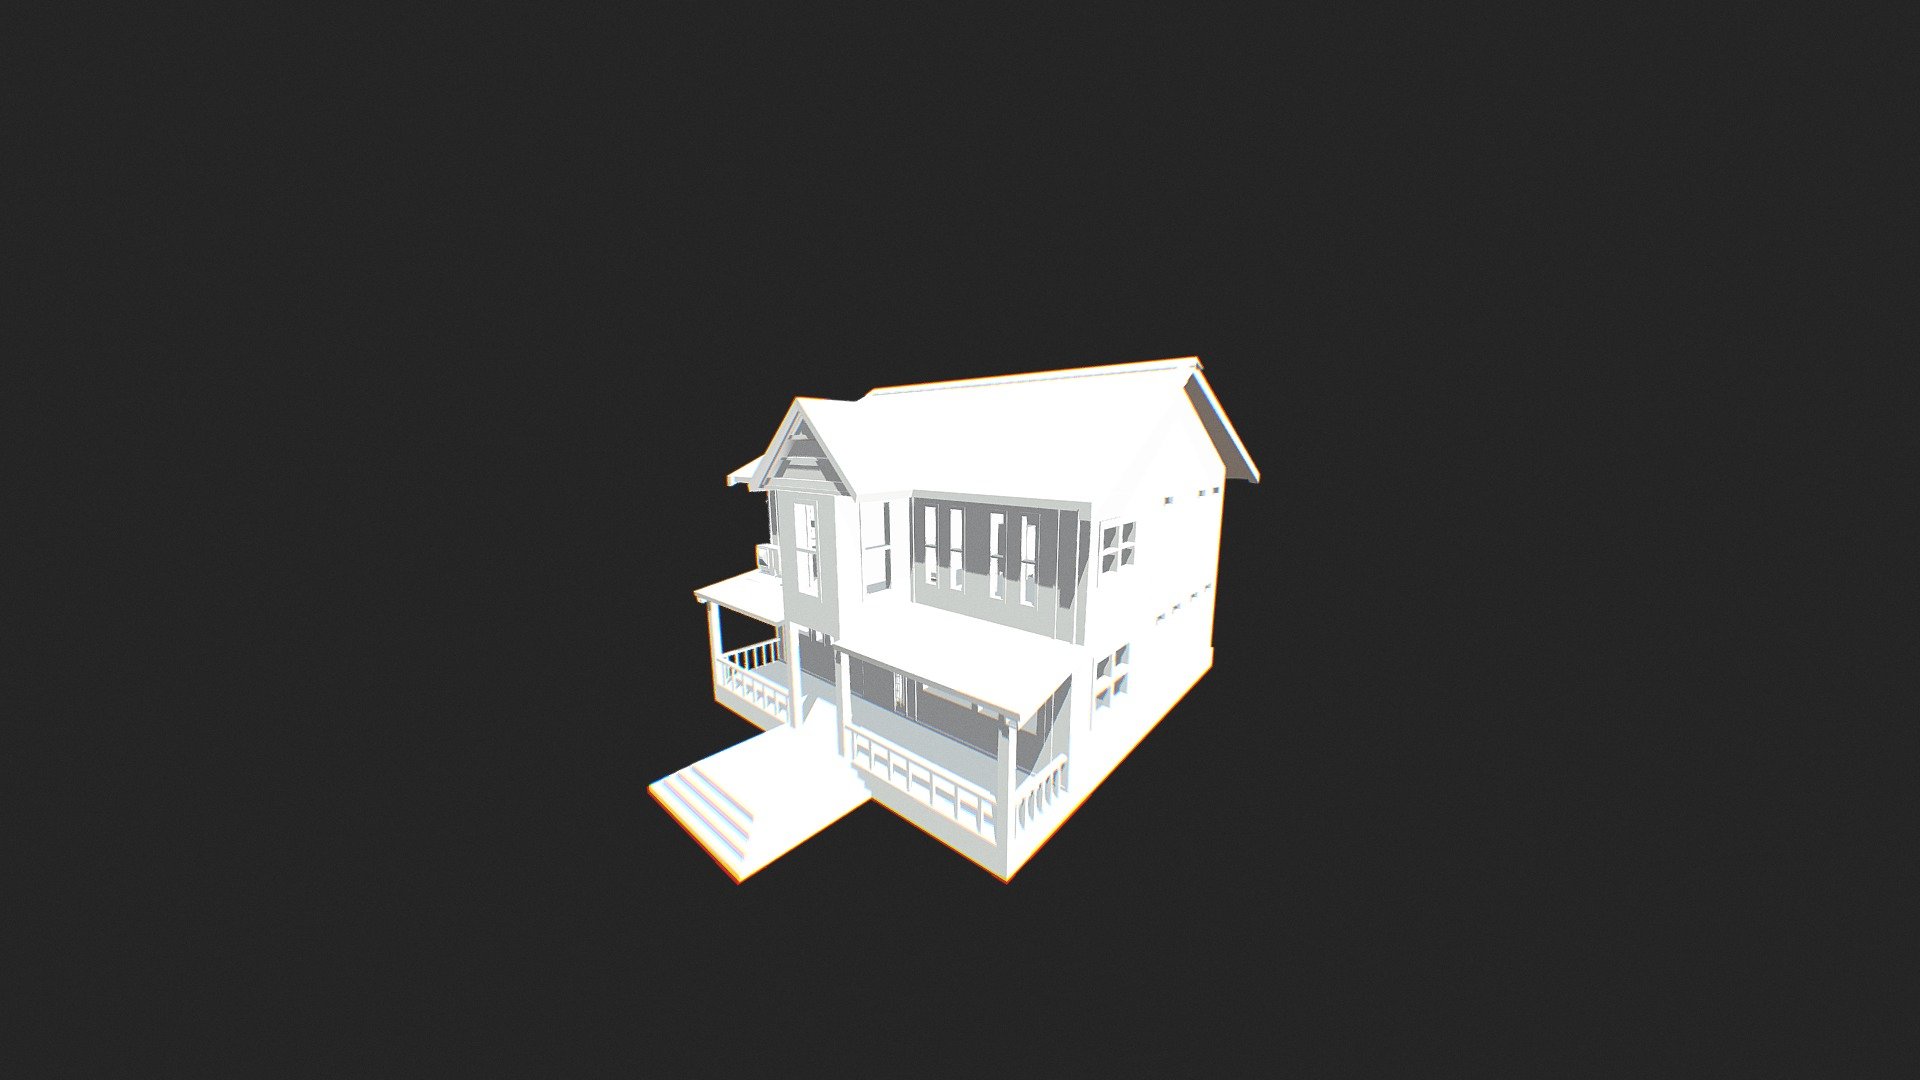 House lowpoly (Ilse's house for references)